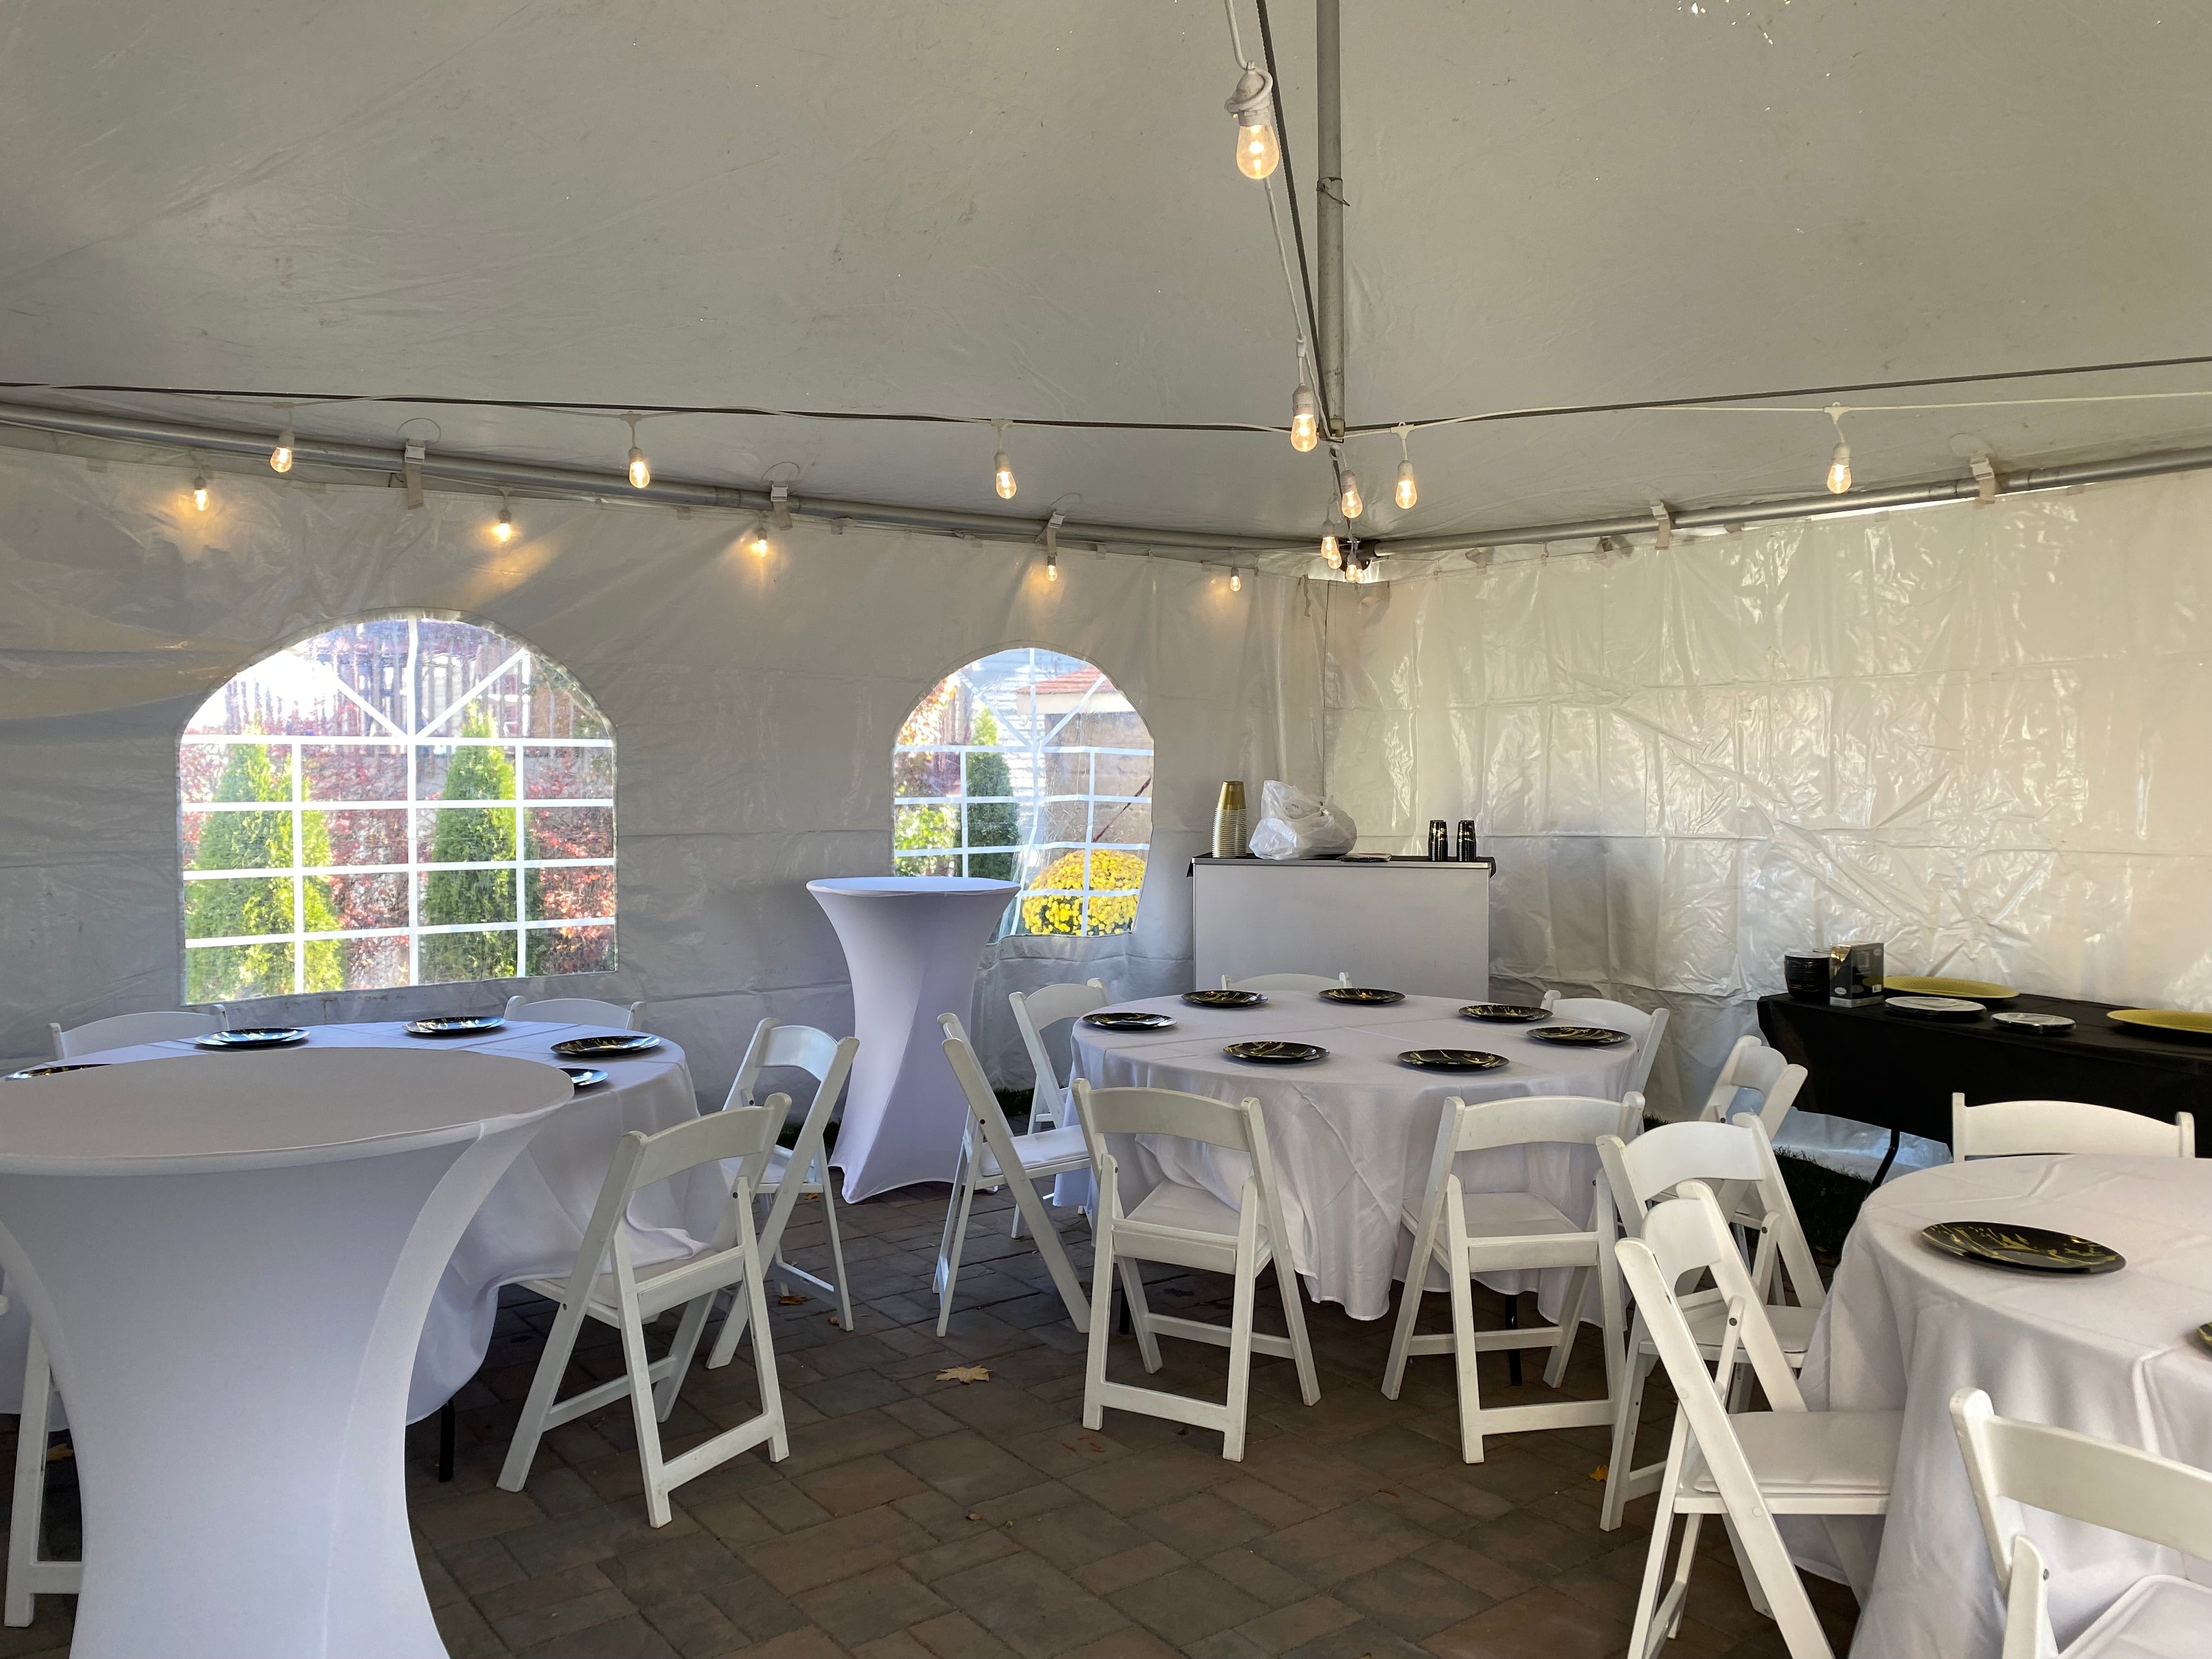 15 x 15 Stay Warm Party Rental Package